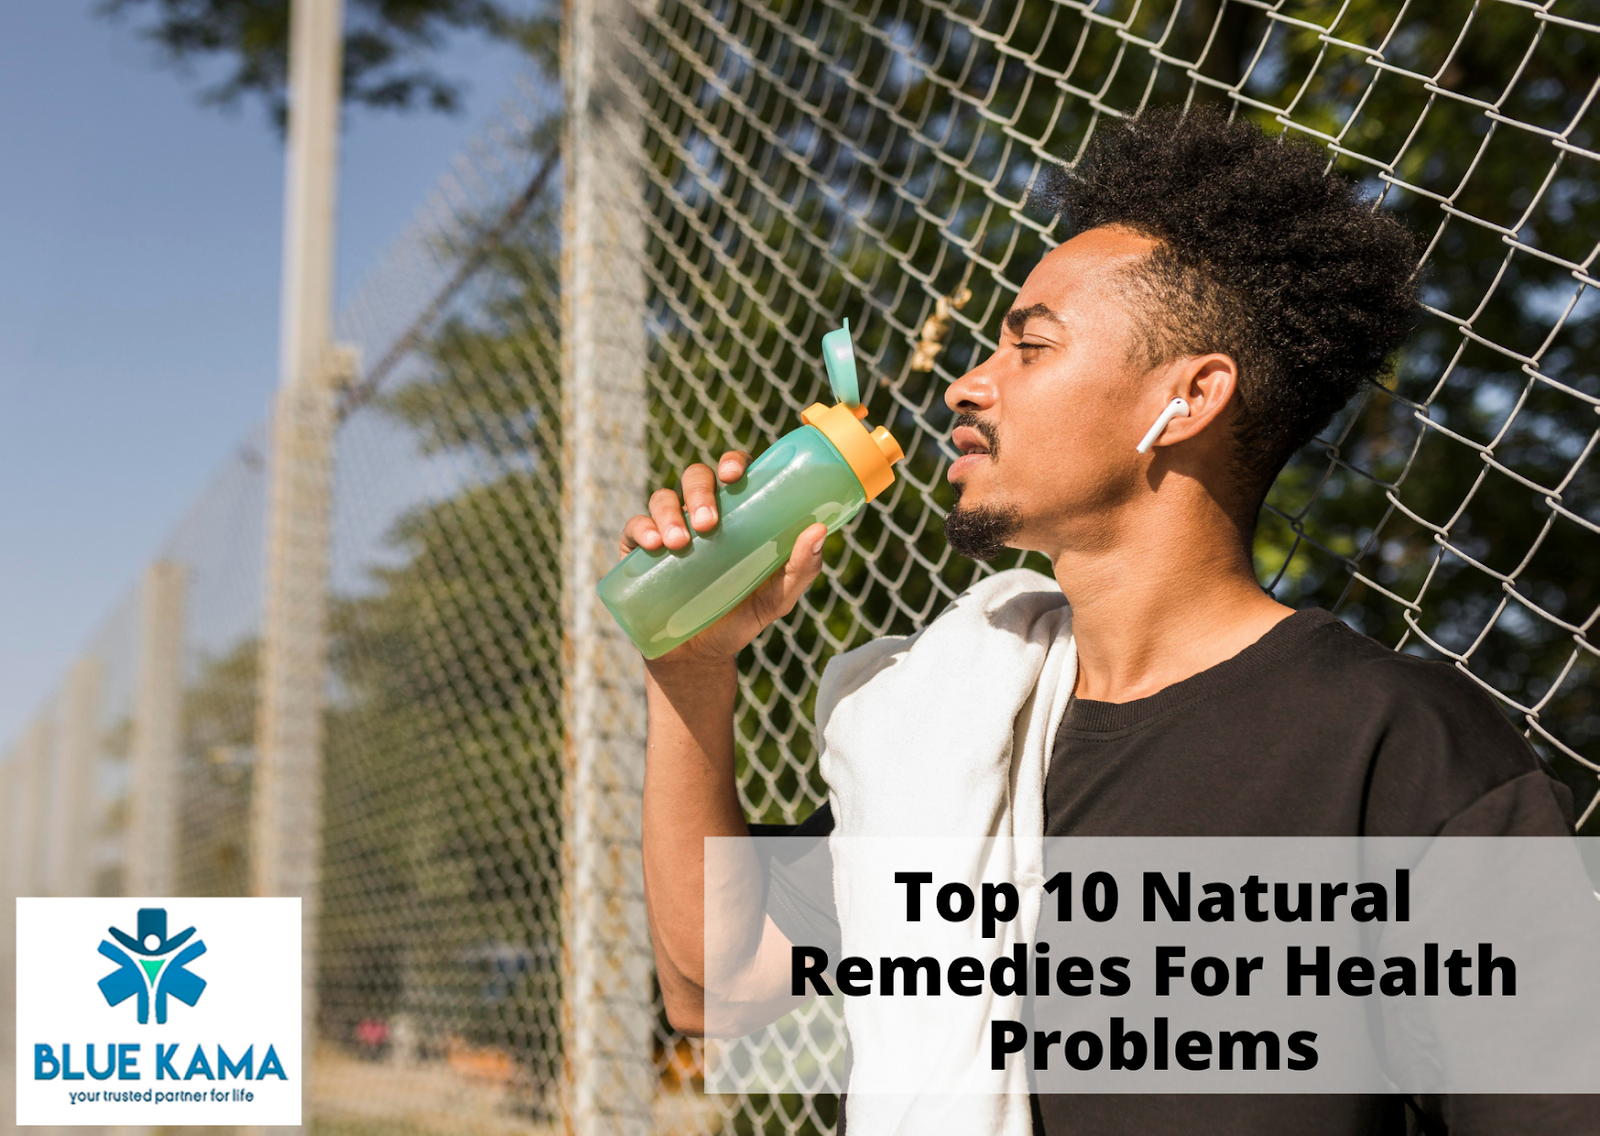 Top 10 Natural remedies for Health Problems